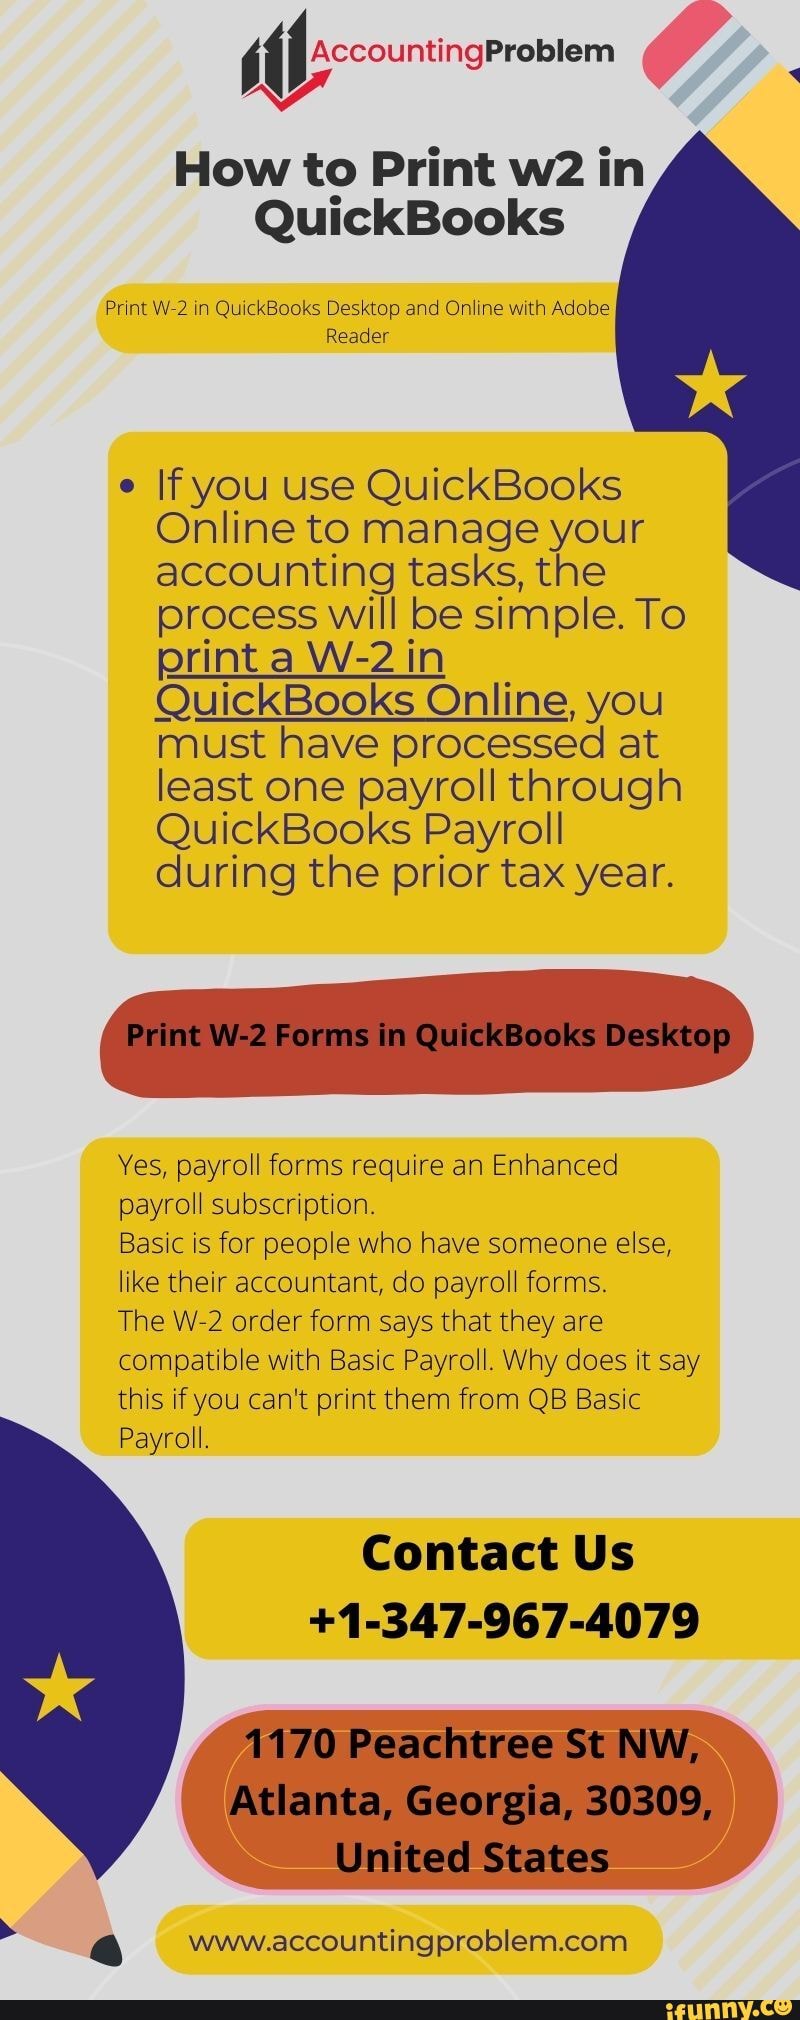 how-to-print-in-quickbooks-print-in-quickbooks-desktop-and-online-with